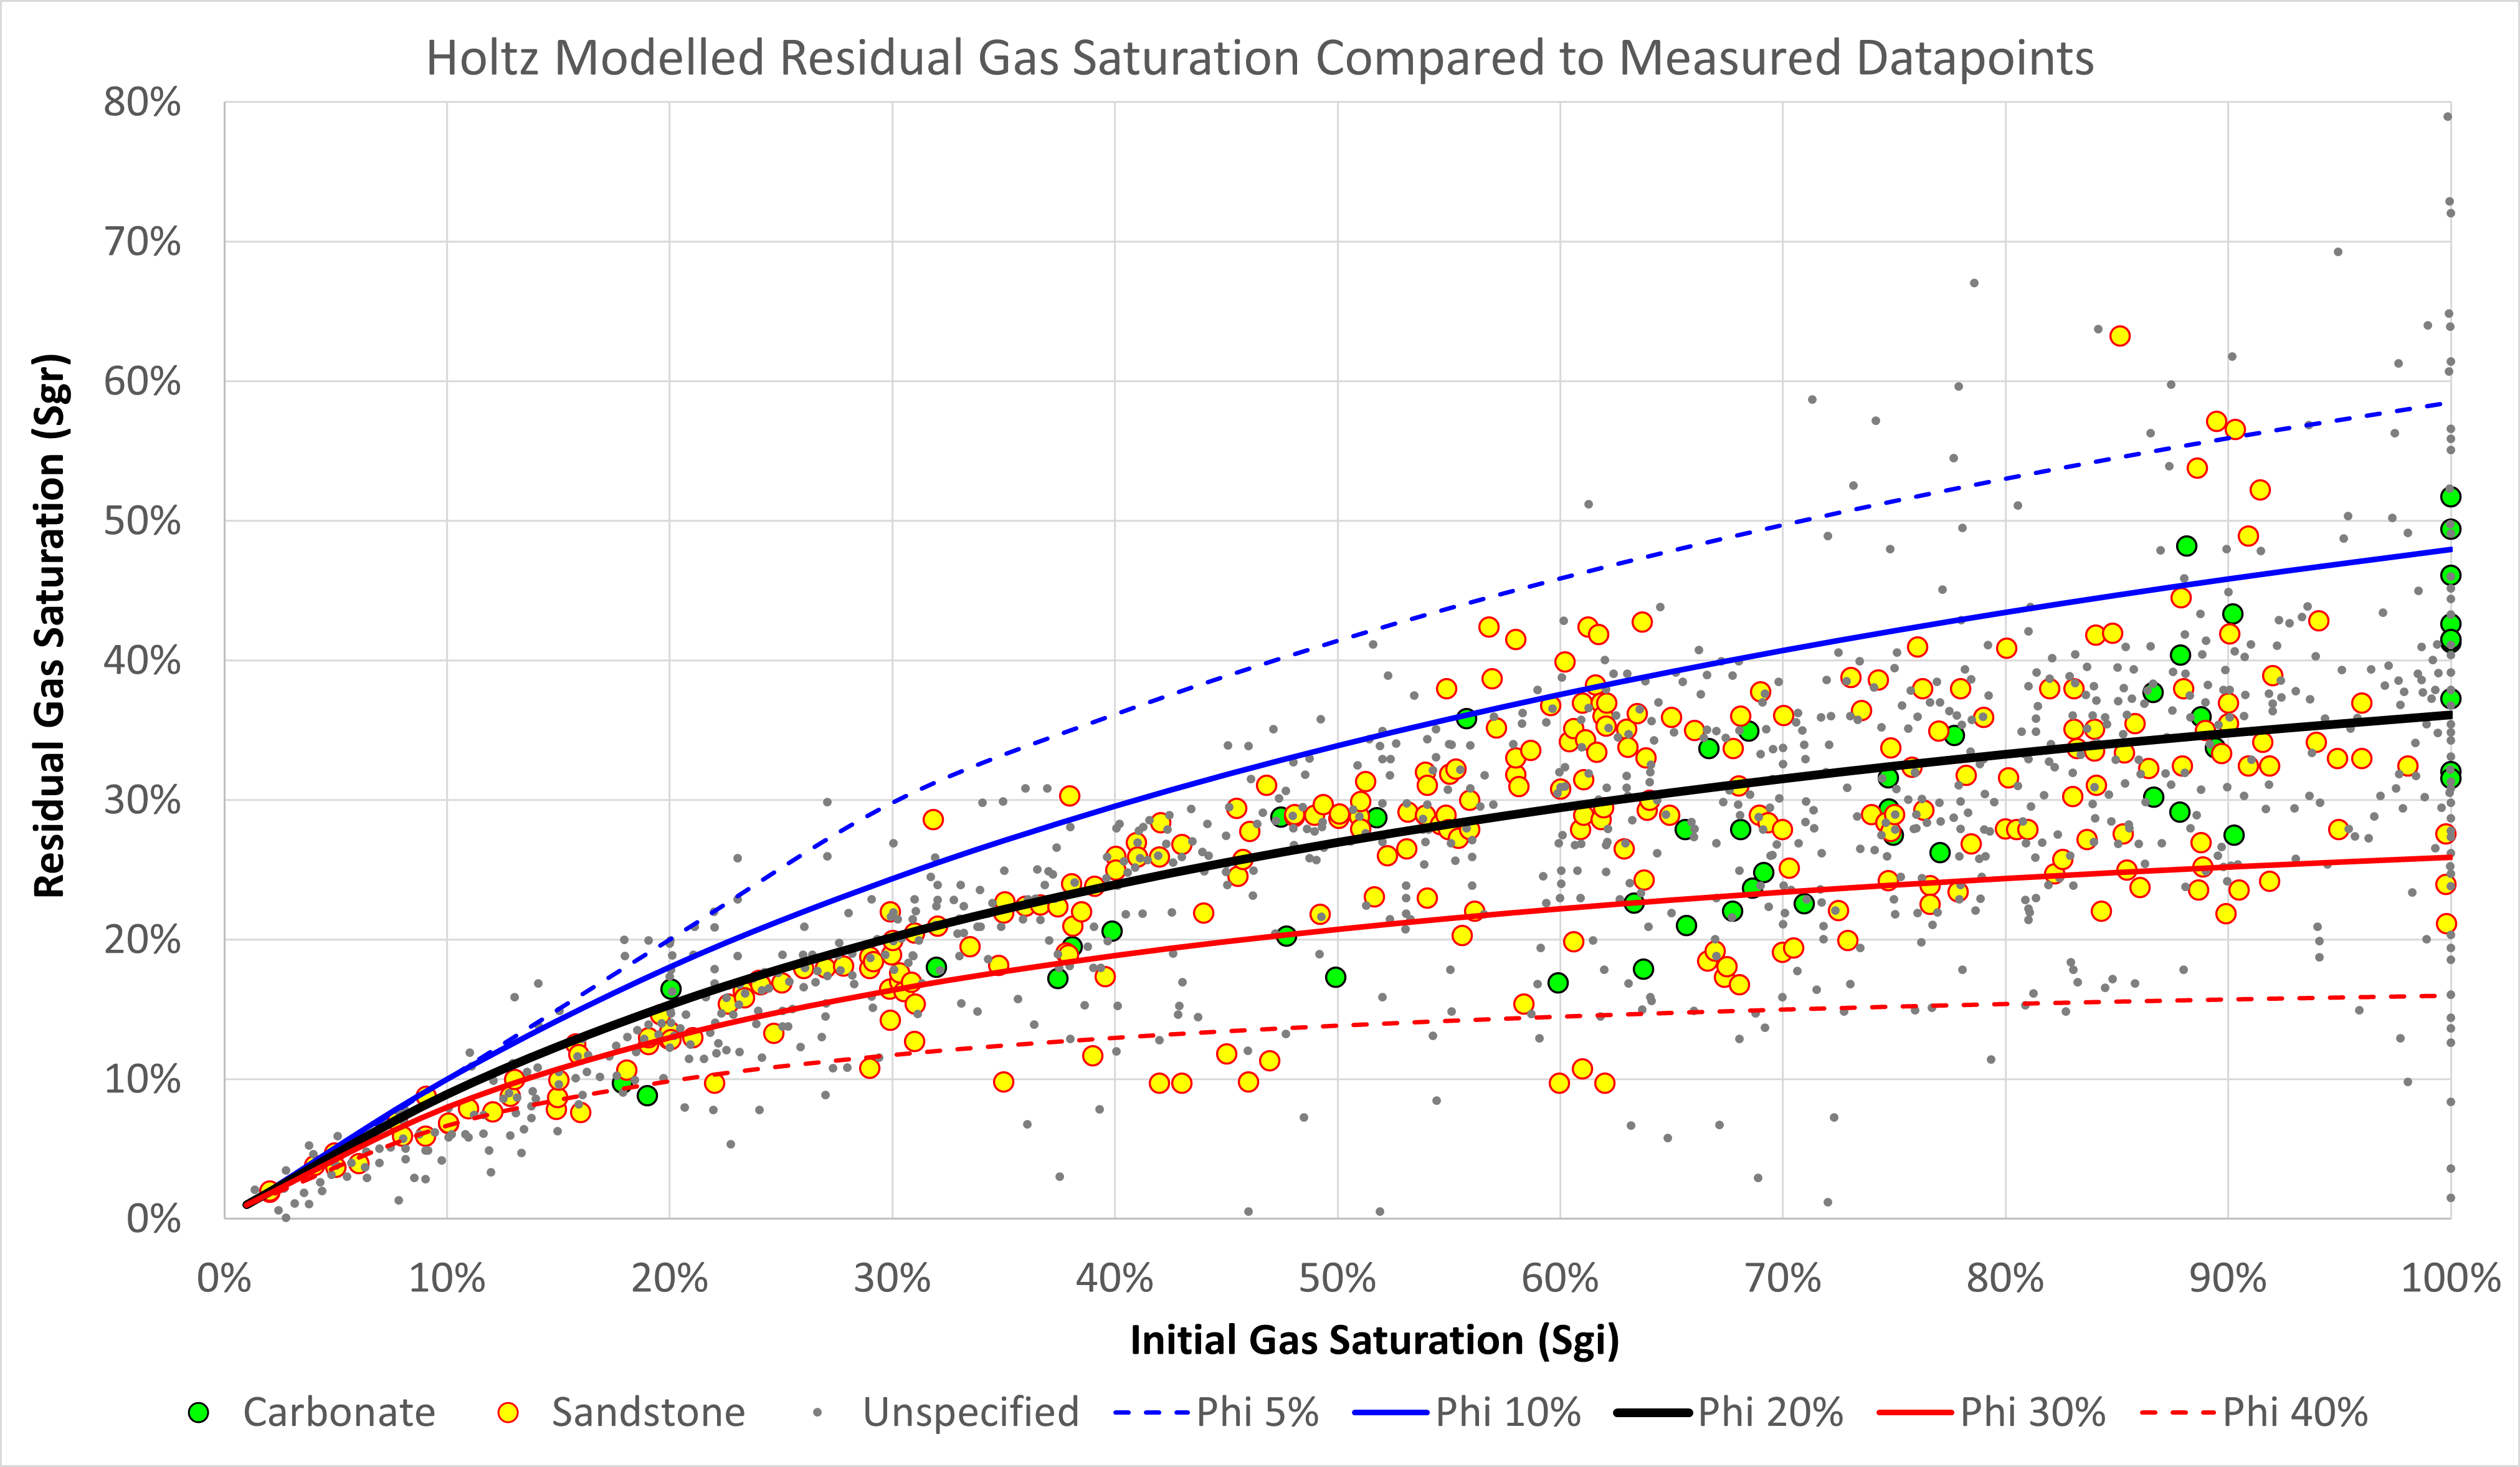 Comparision of modelled residual gas saturation using Holtz equation at different porosities against measured datapoints.